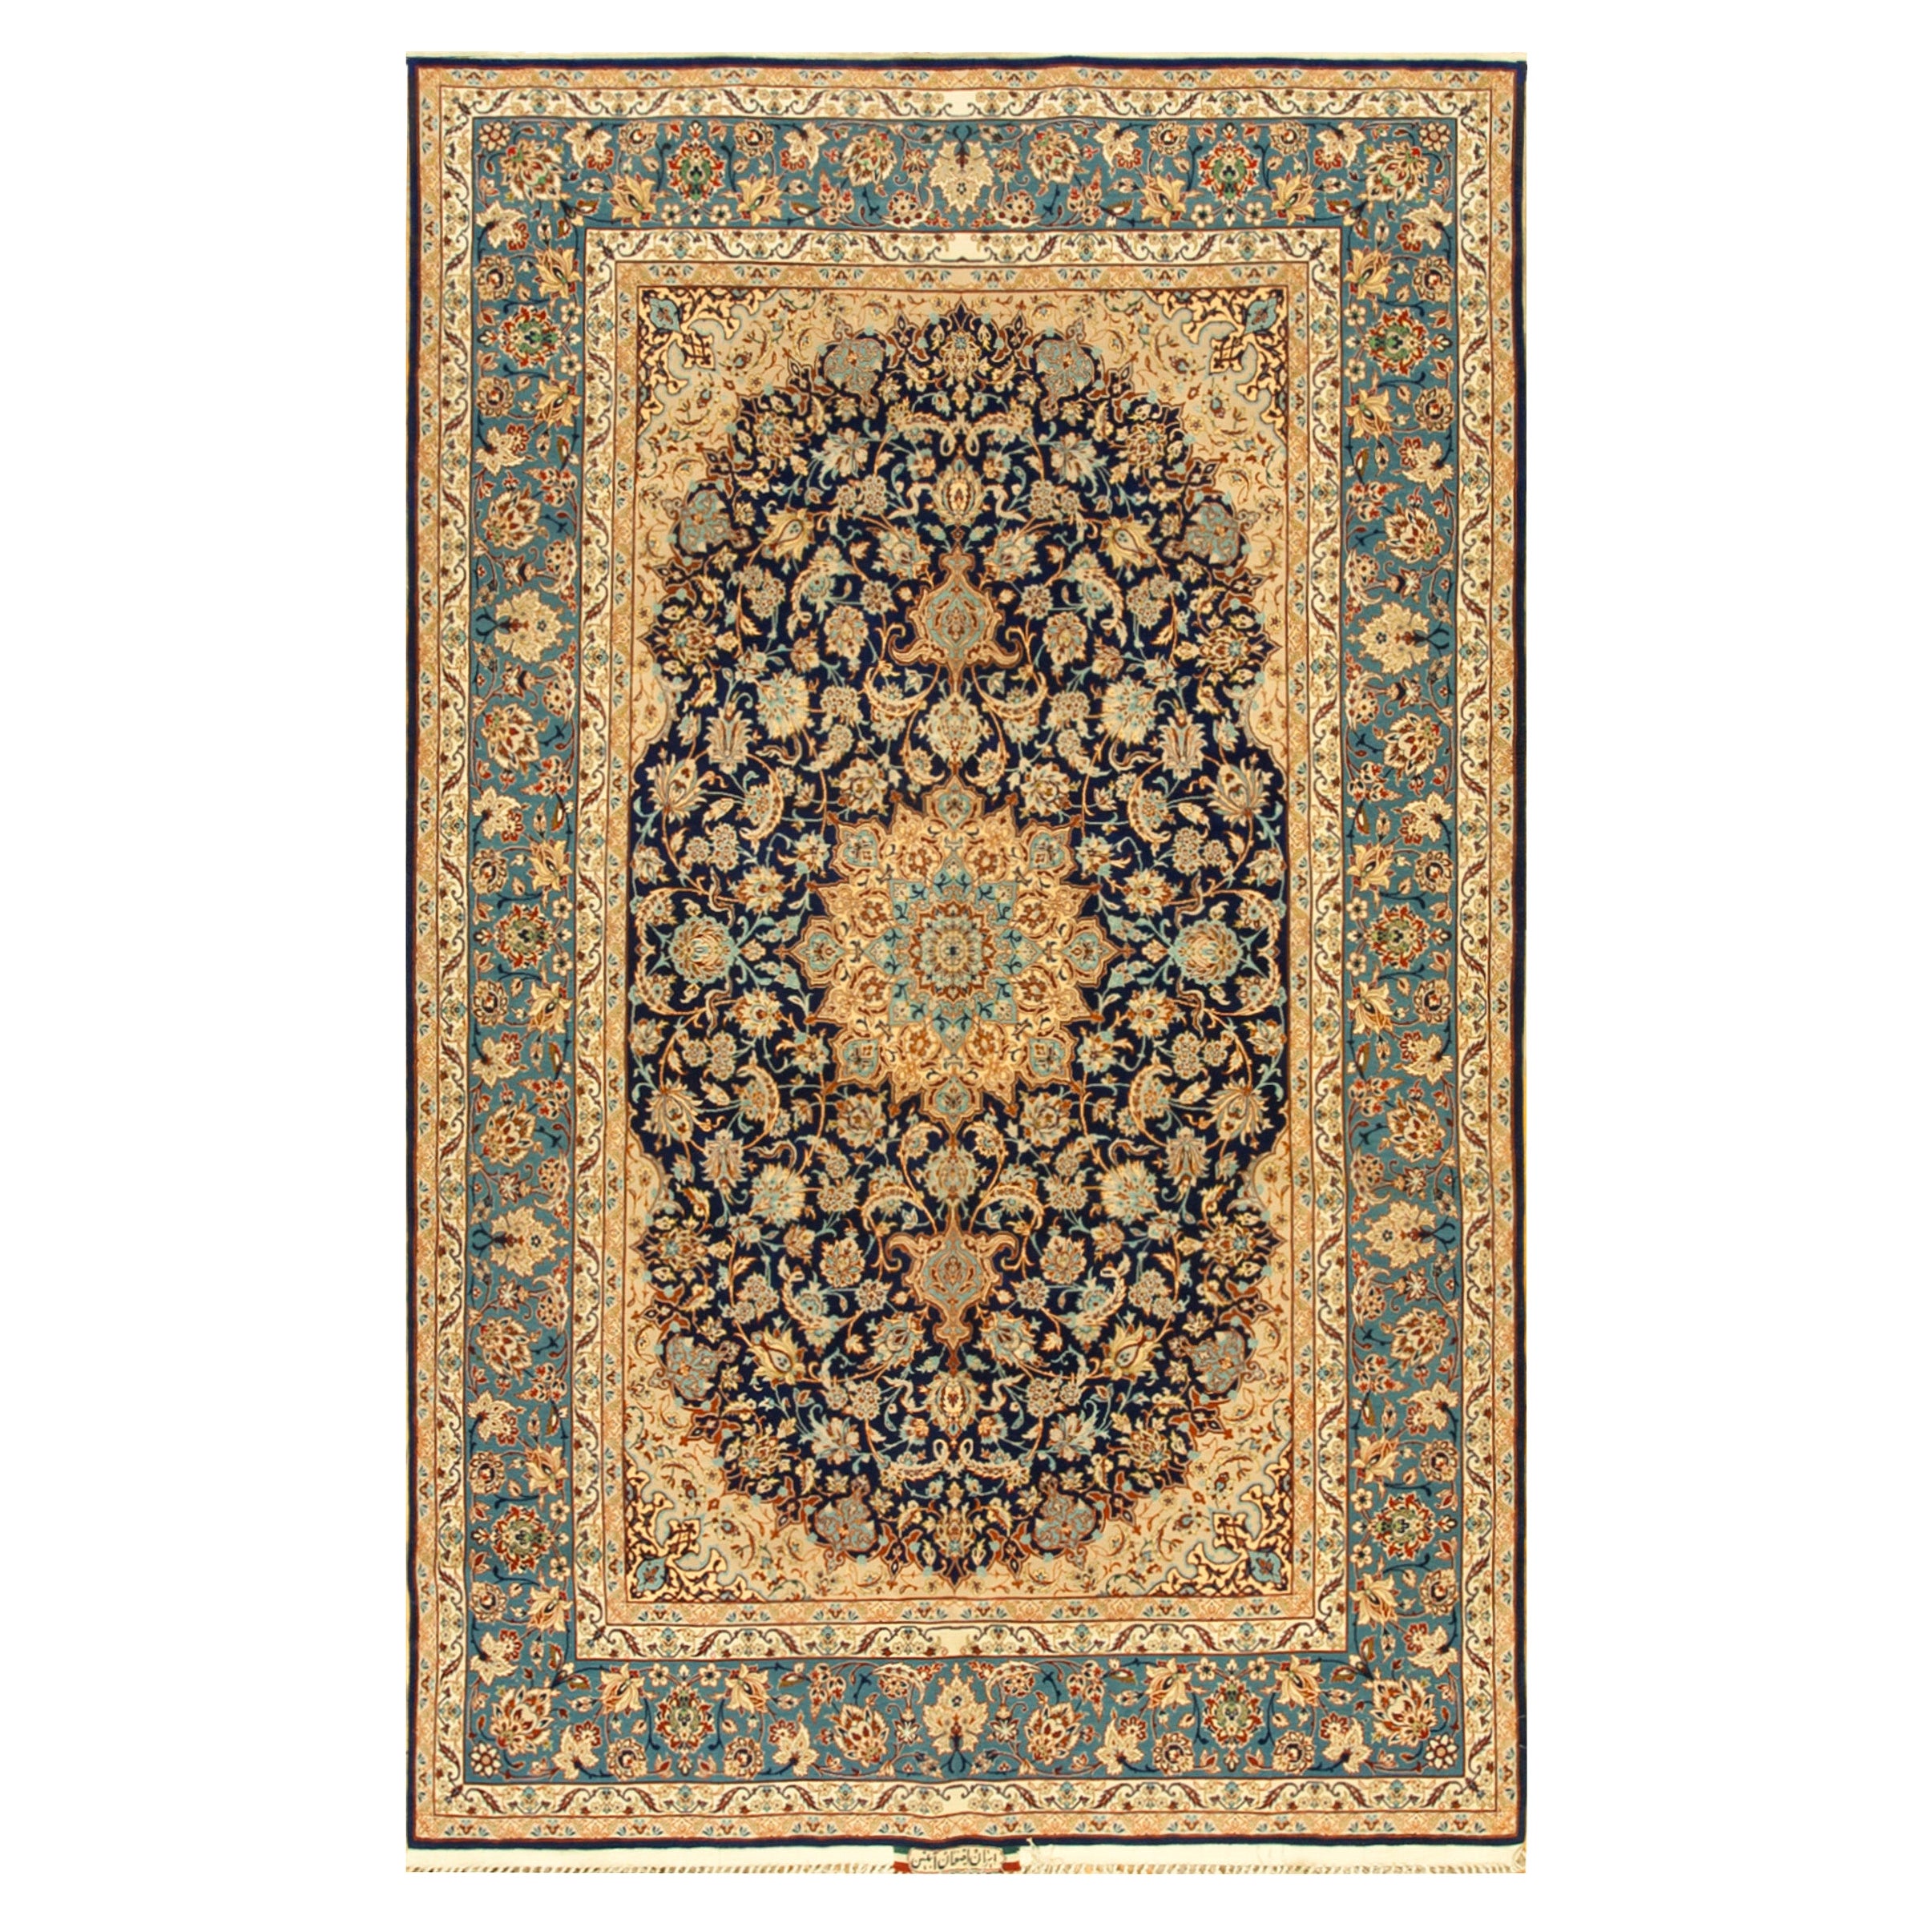 Mid 20th Century Persian Isfahan Carpet Signed Abtin (4'10" x 7 10" - 147 x 238) For Sale